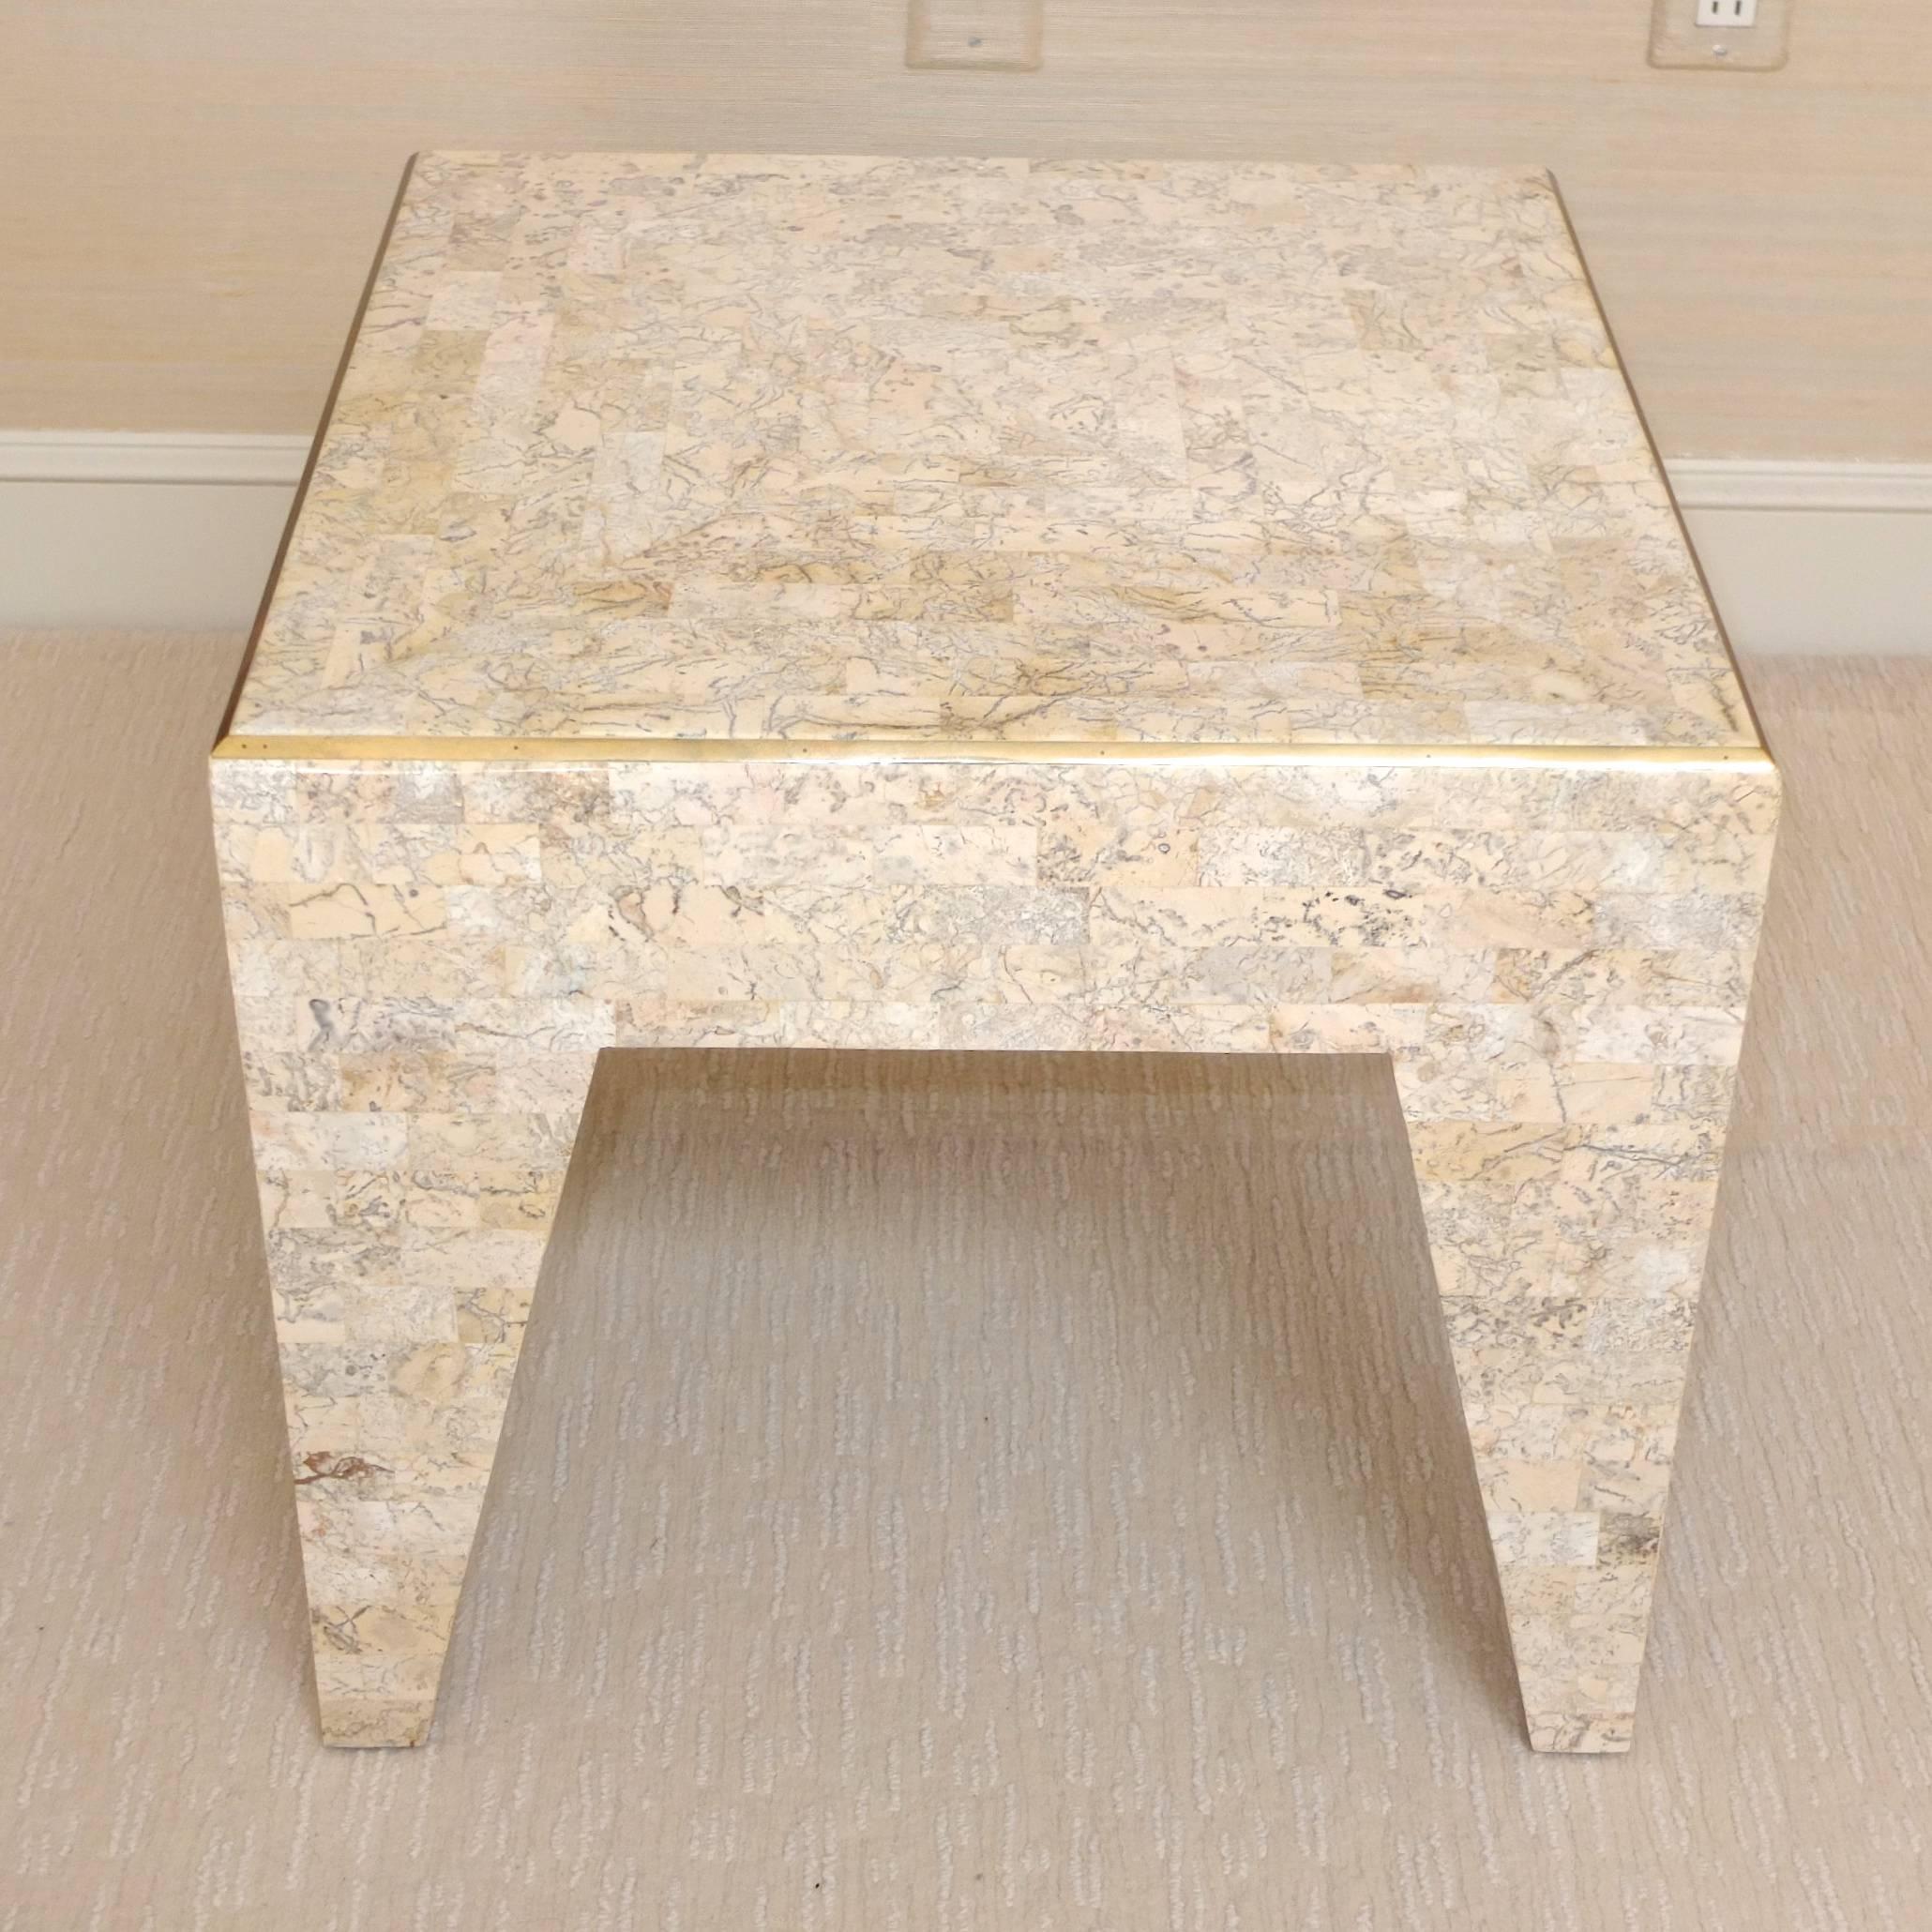 Versatile occasional table by Maitland Smith in tessellated fossil stone and brass inlay over wood structure. Tapered 3-D geometric pyramidal legs. Engraved brass label on underside.  Excellent condition.